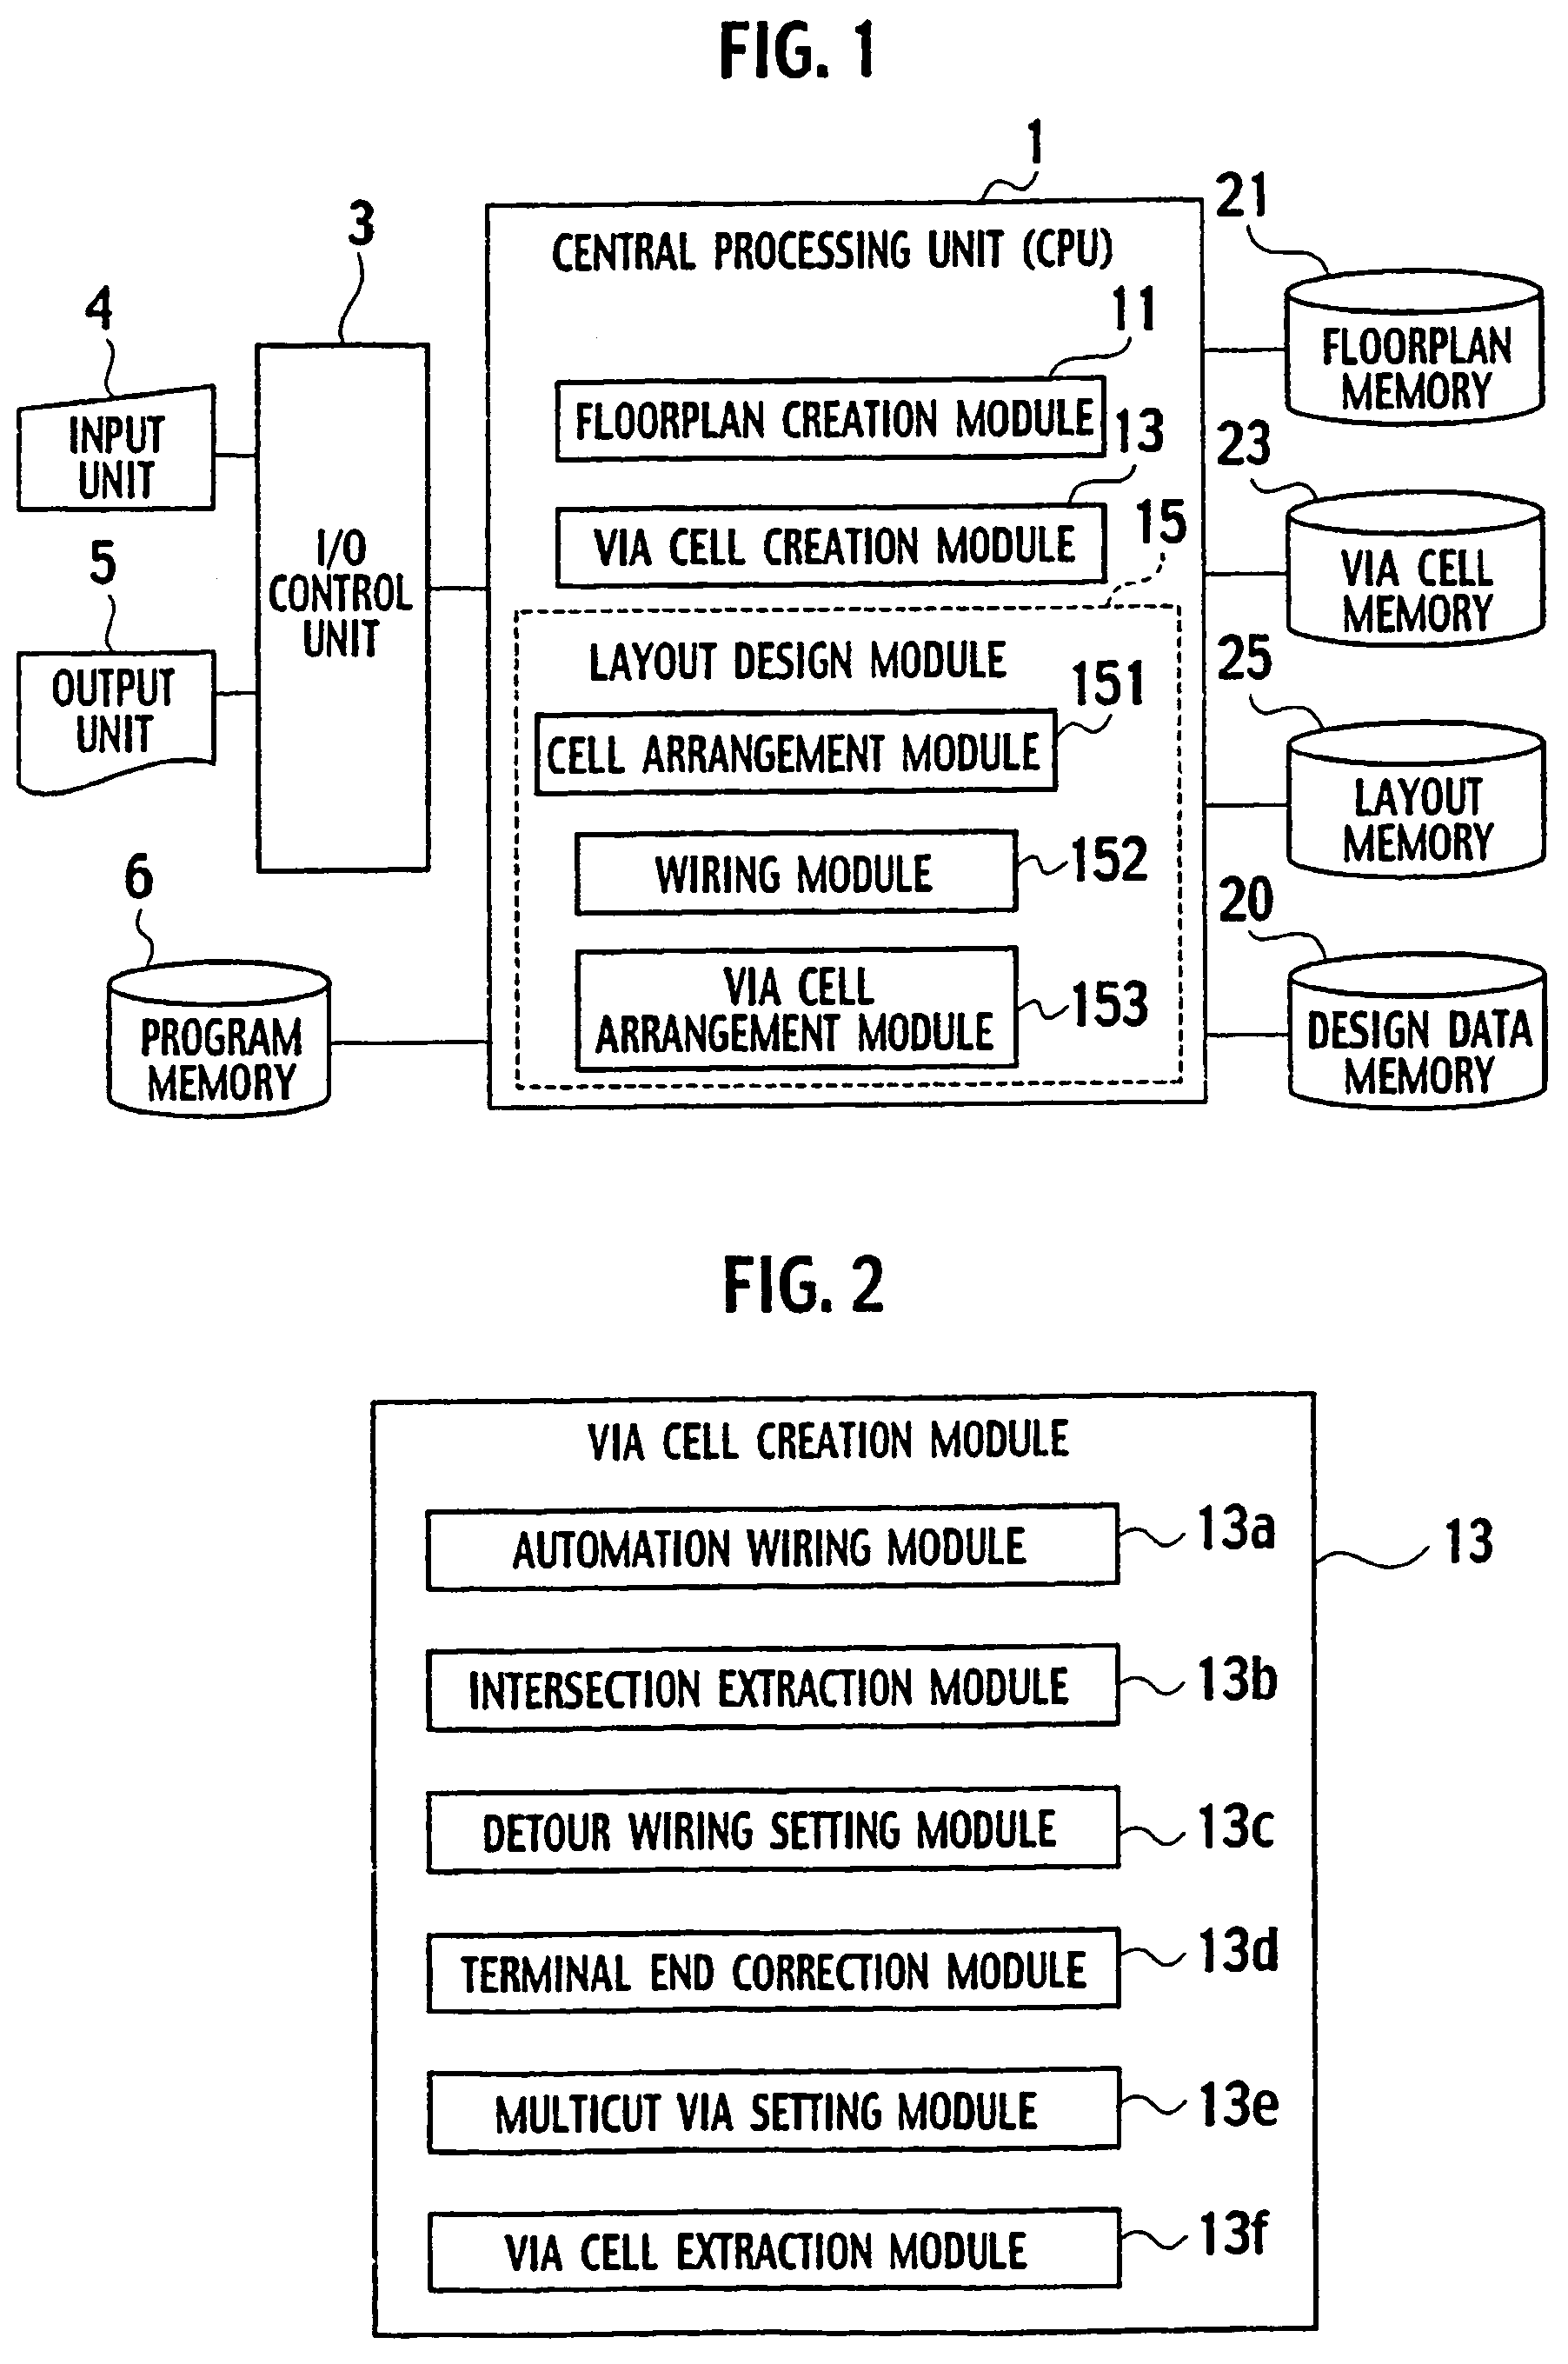 Method of manufacturing a semiconductor integrated circuit, a program for a computer automated design system, and a semiconductor integrated circuit